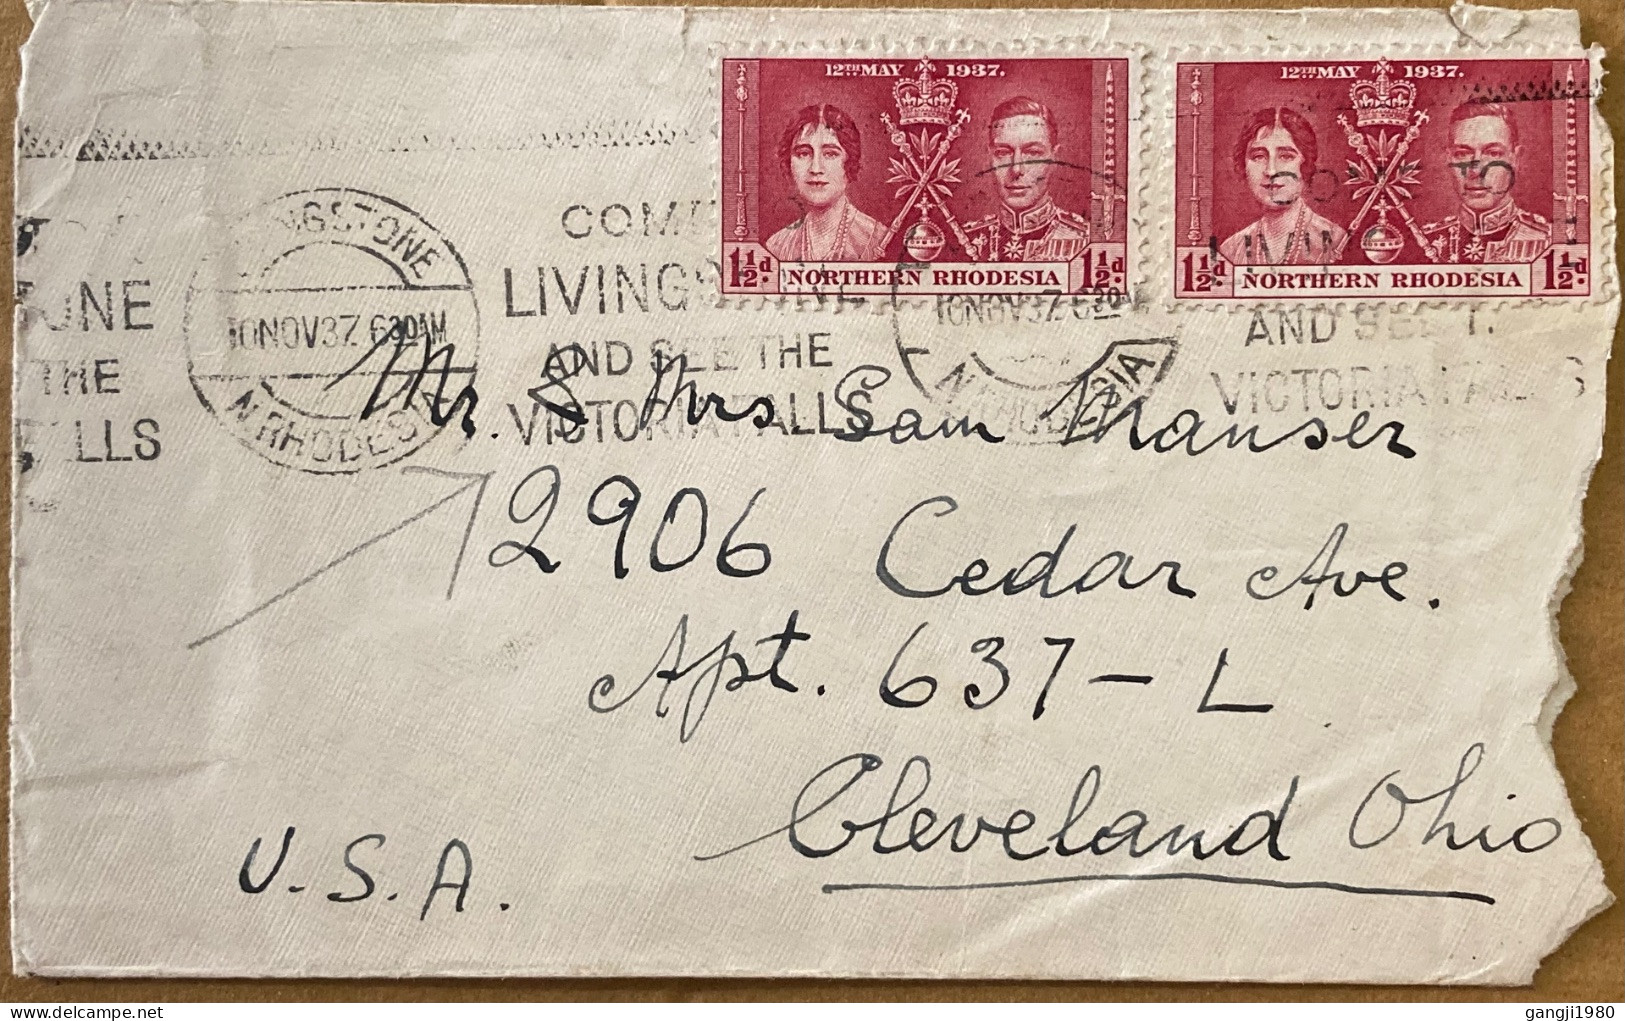 NORTHERN RHODESIA1937, KING & QUEEN CORONATION STAMP, SLOGAN COME LIVING AND SEE THE VICTORIA FALL. - Northern Rhodesia (...-1963)